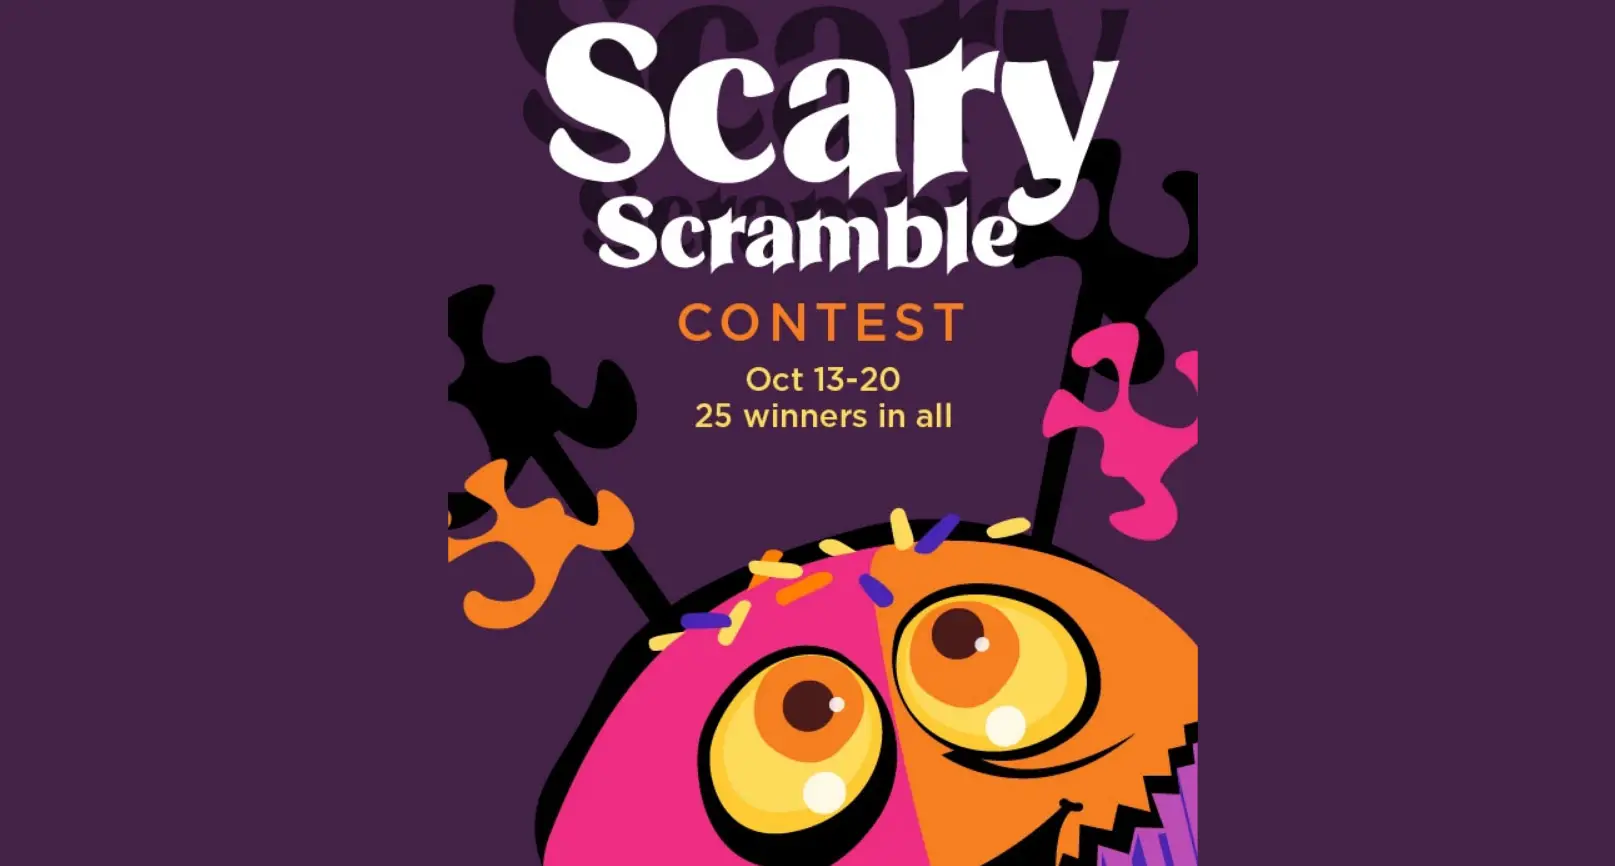 Play the Scary Scramble Contest each day from October 13 to October 20 for your chance to win a cookie deocrating prize pack from Imperial Sugar & Dixie Crystals